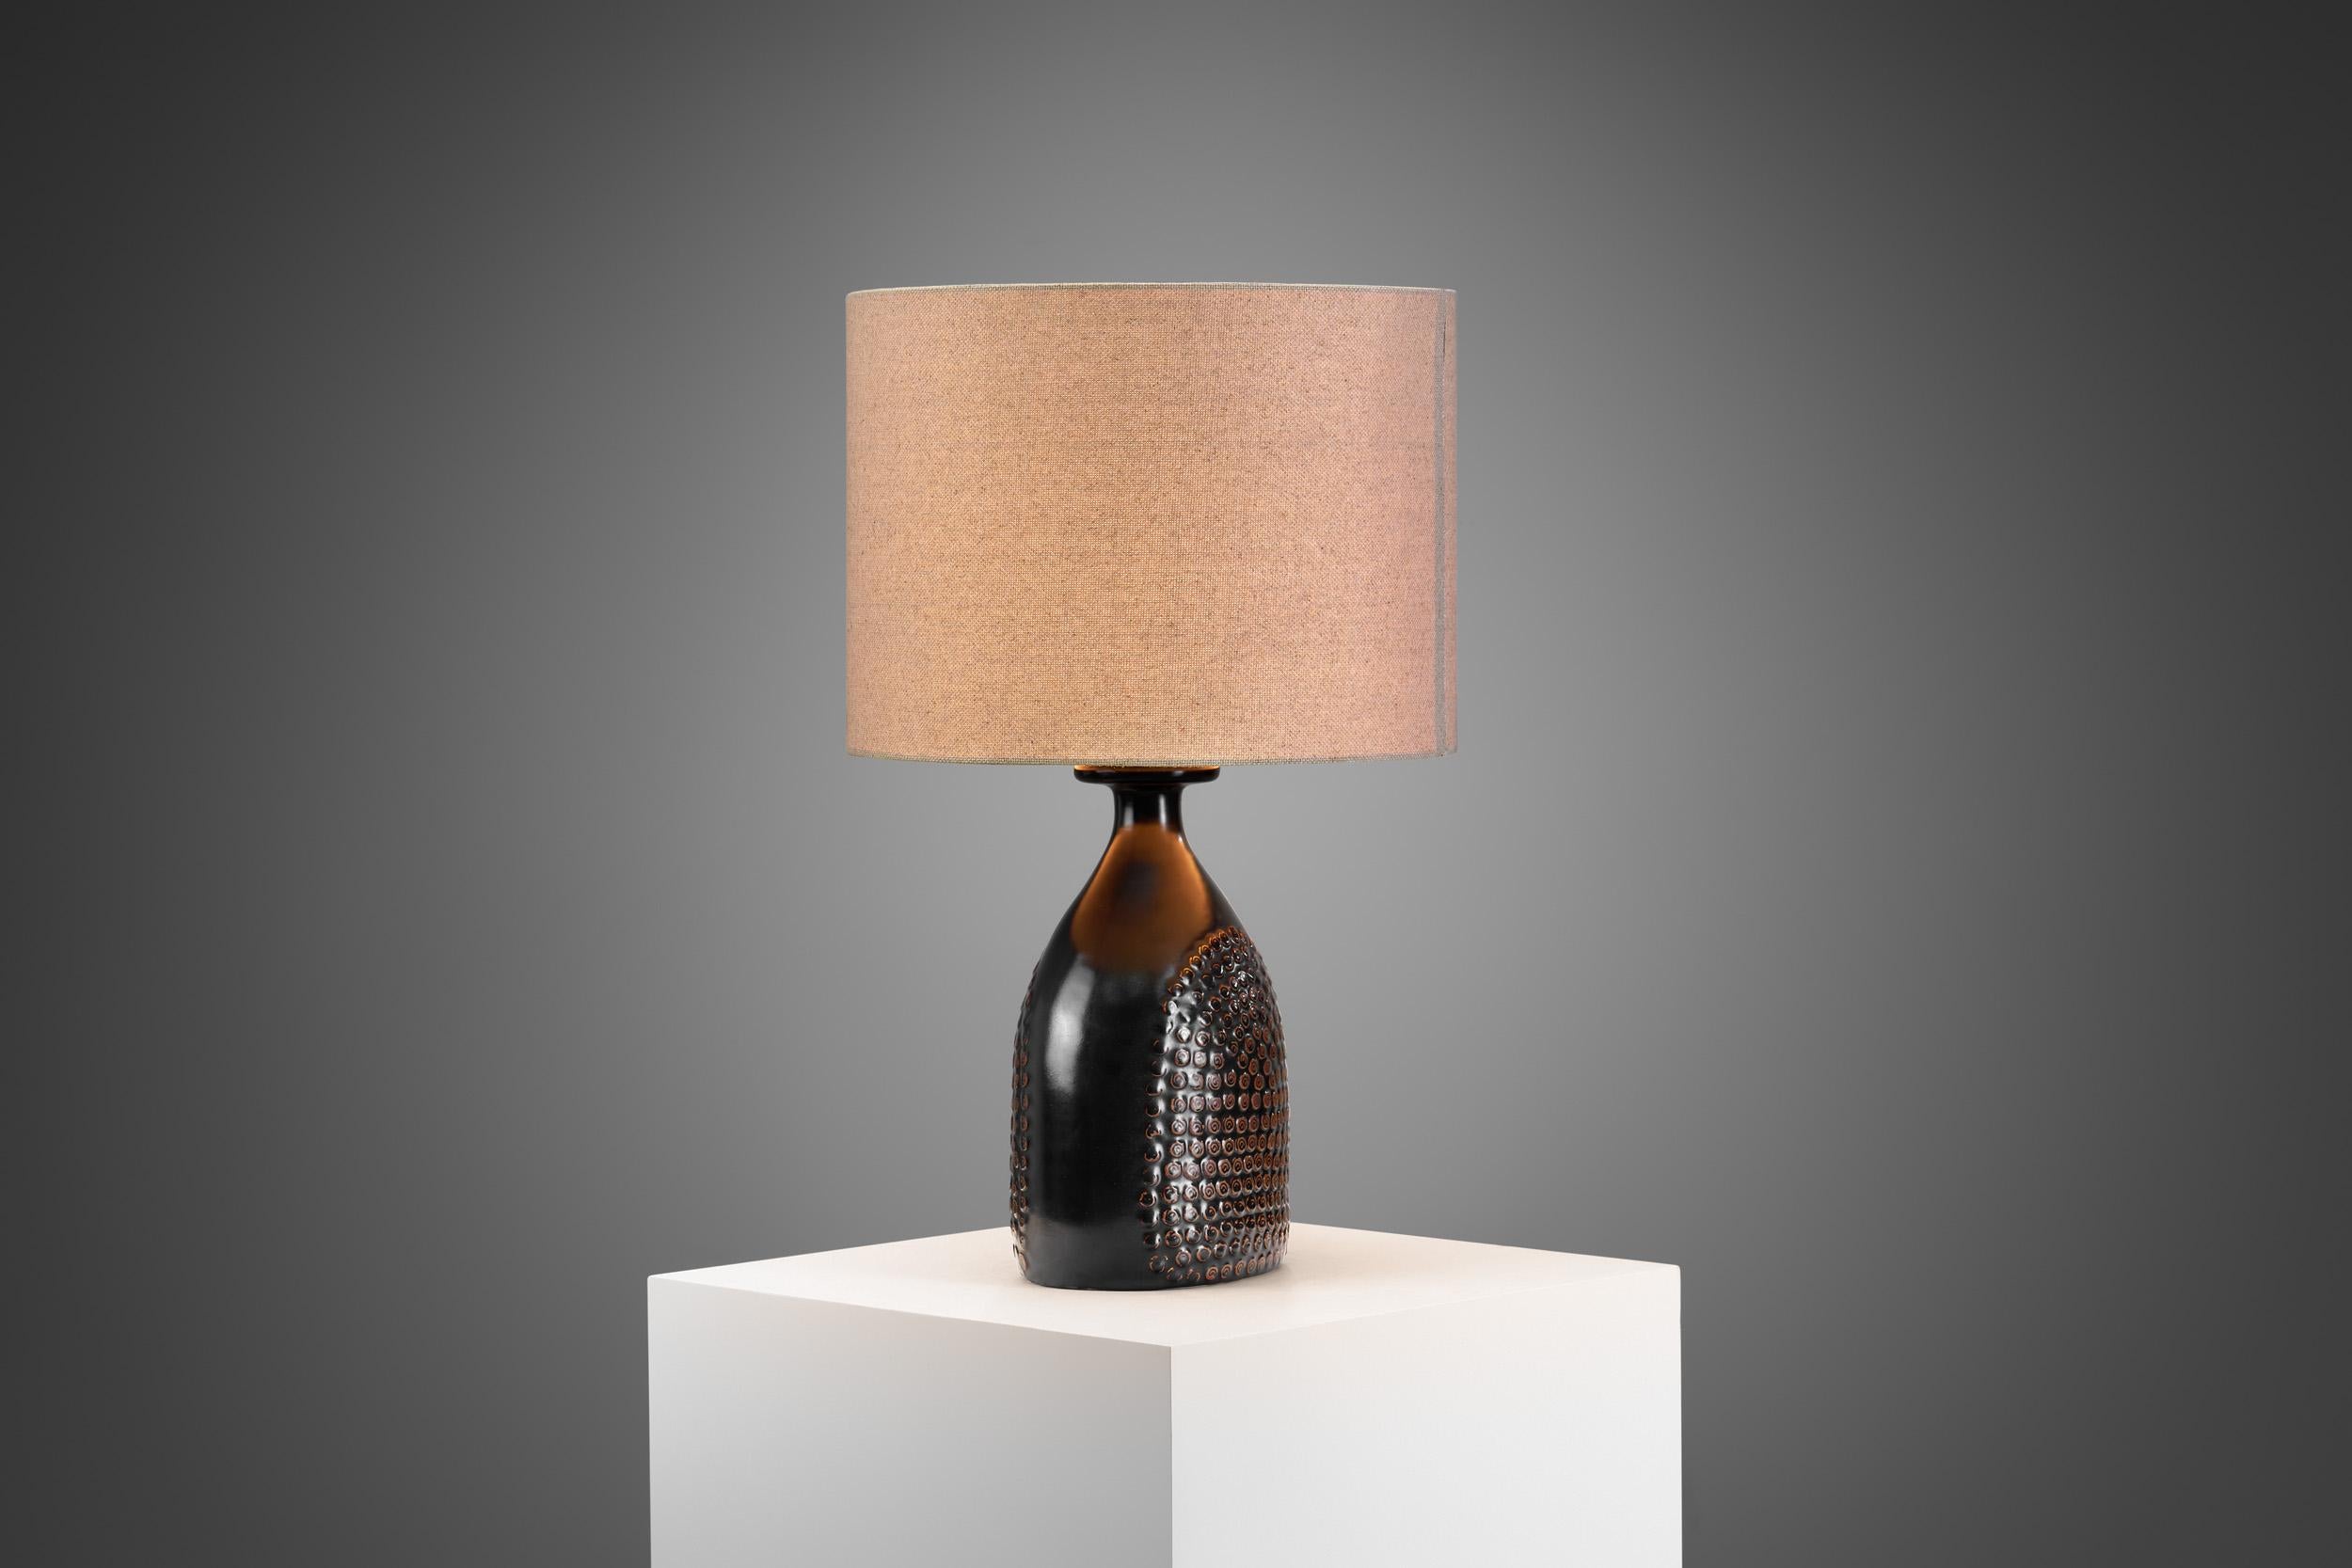 Ceramic Stig Lindberg Stoneware Table Lamp with Fabric Shade, Sweden 1960s For Sale